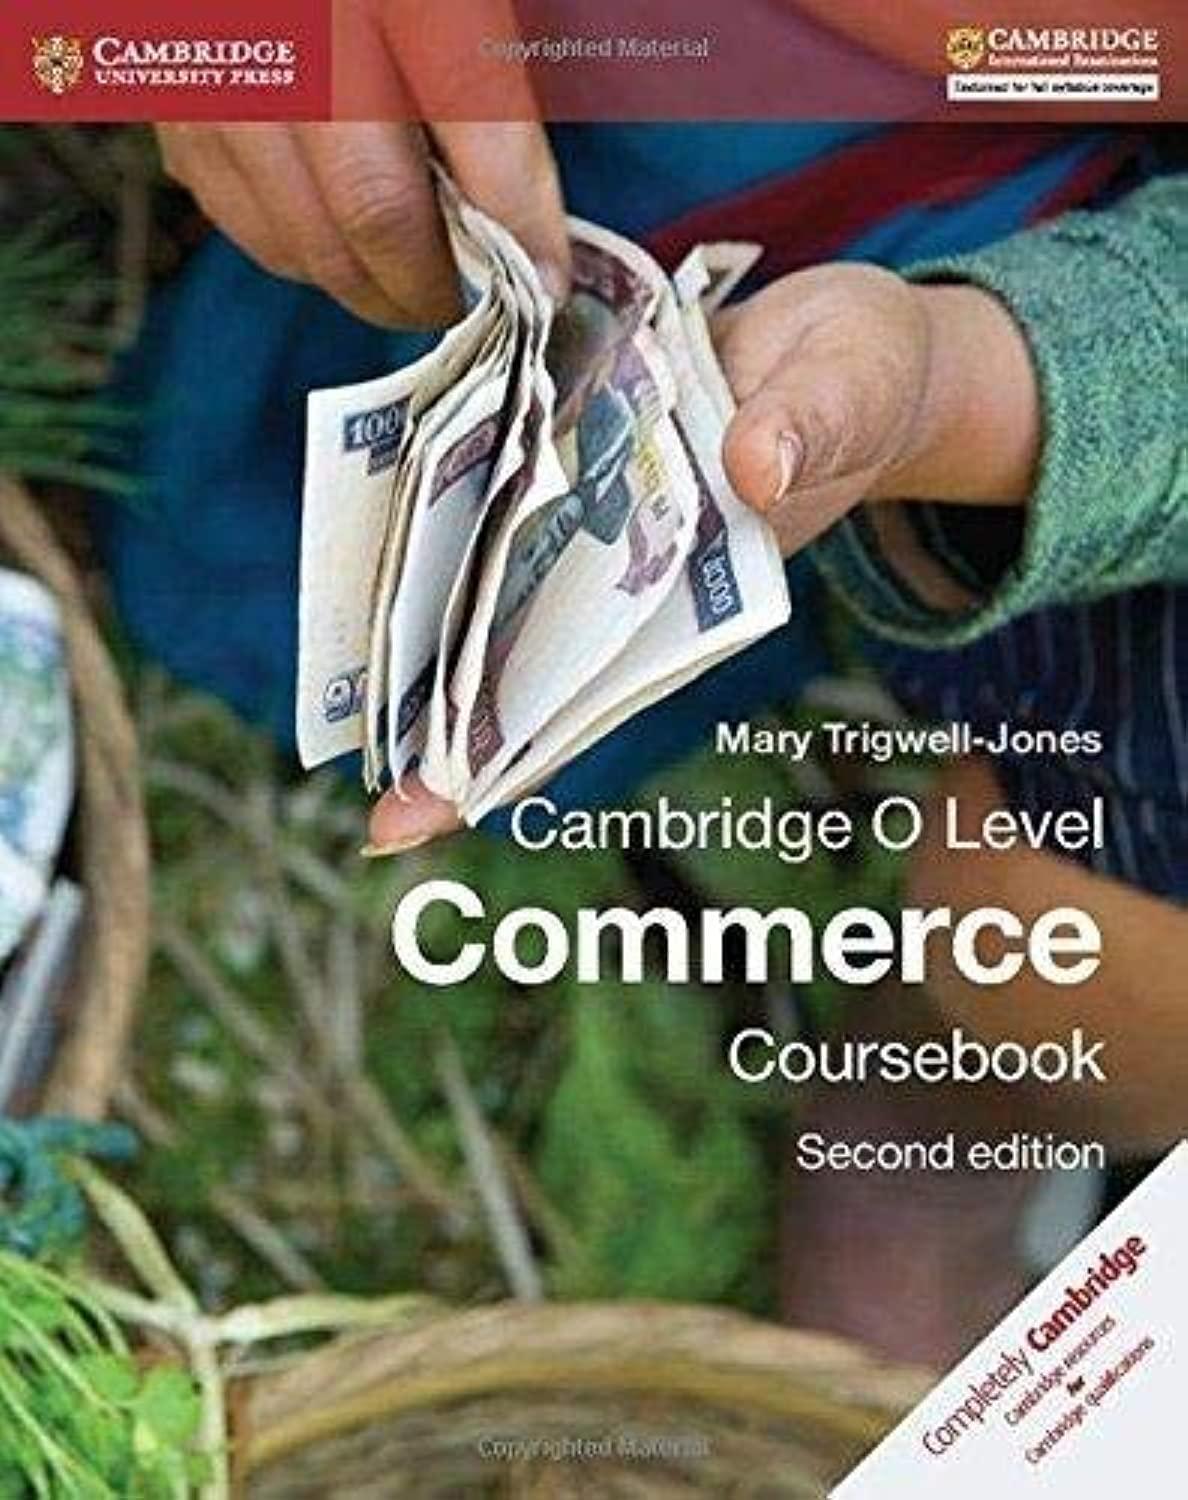 cambridge o level commerce coursebook 2nd edition mary trigwell-jones 1107579090, 978-1107579095